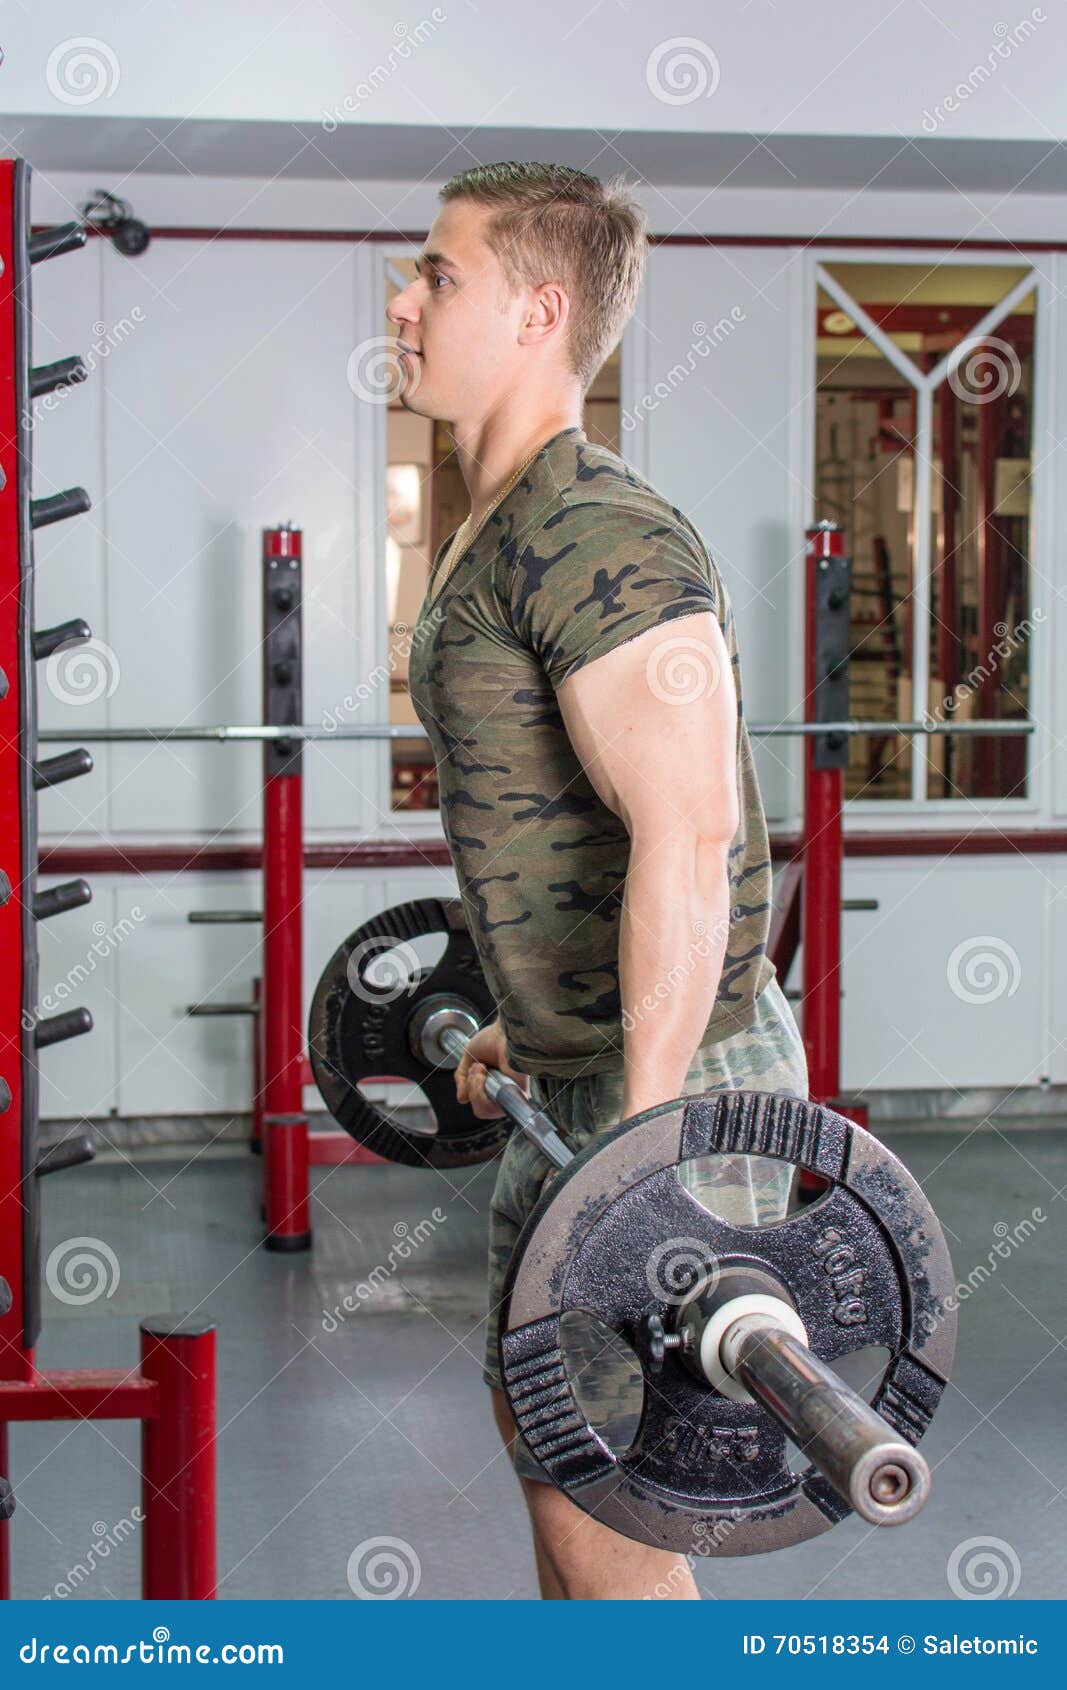 Heavy Lifting Stock Photos, Pictures & Royalty-Free Images 